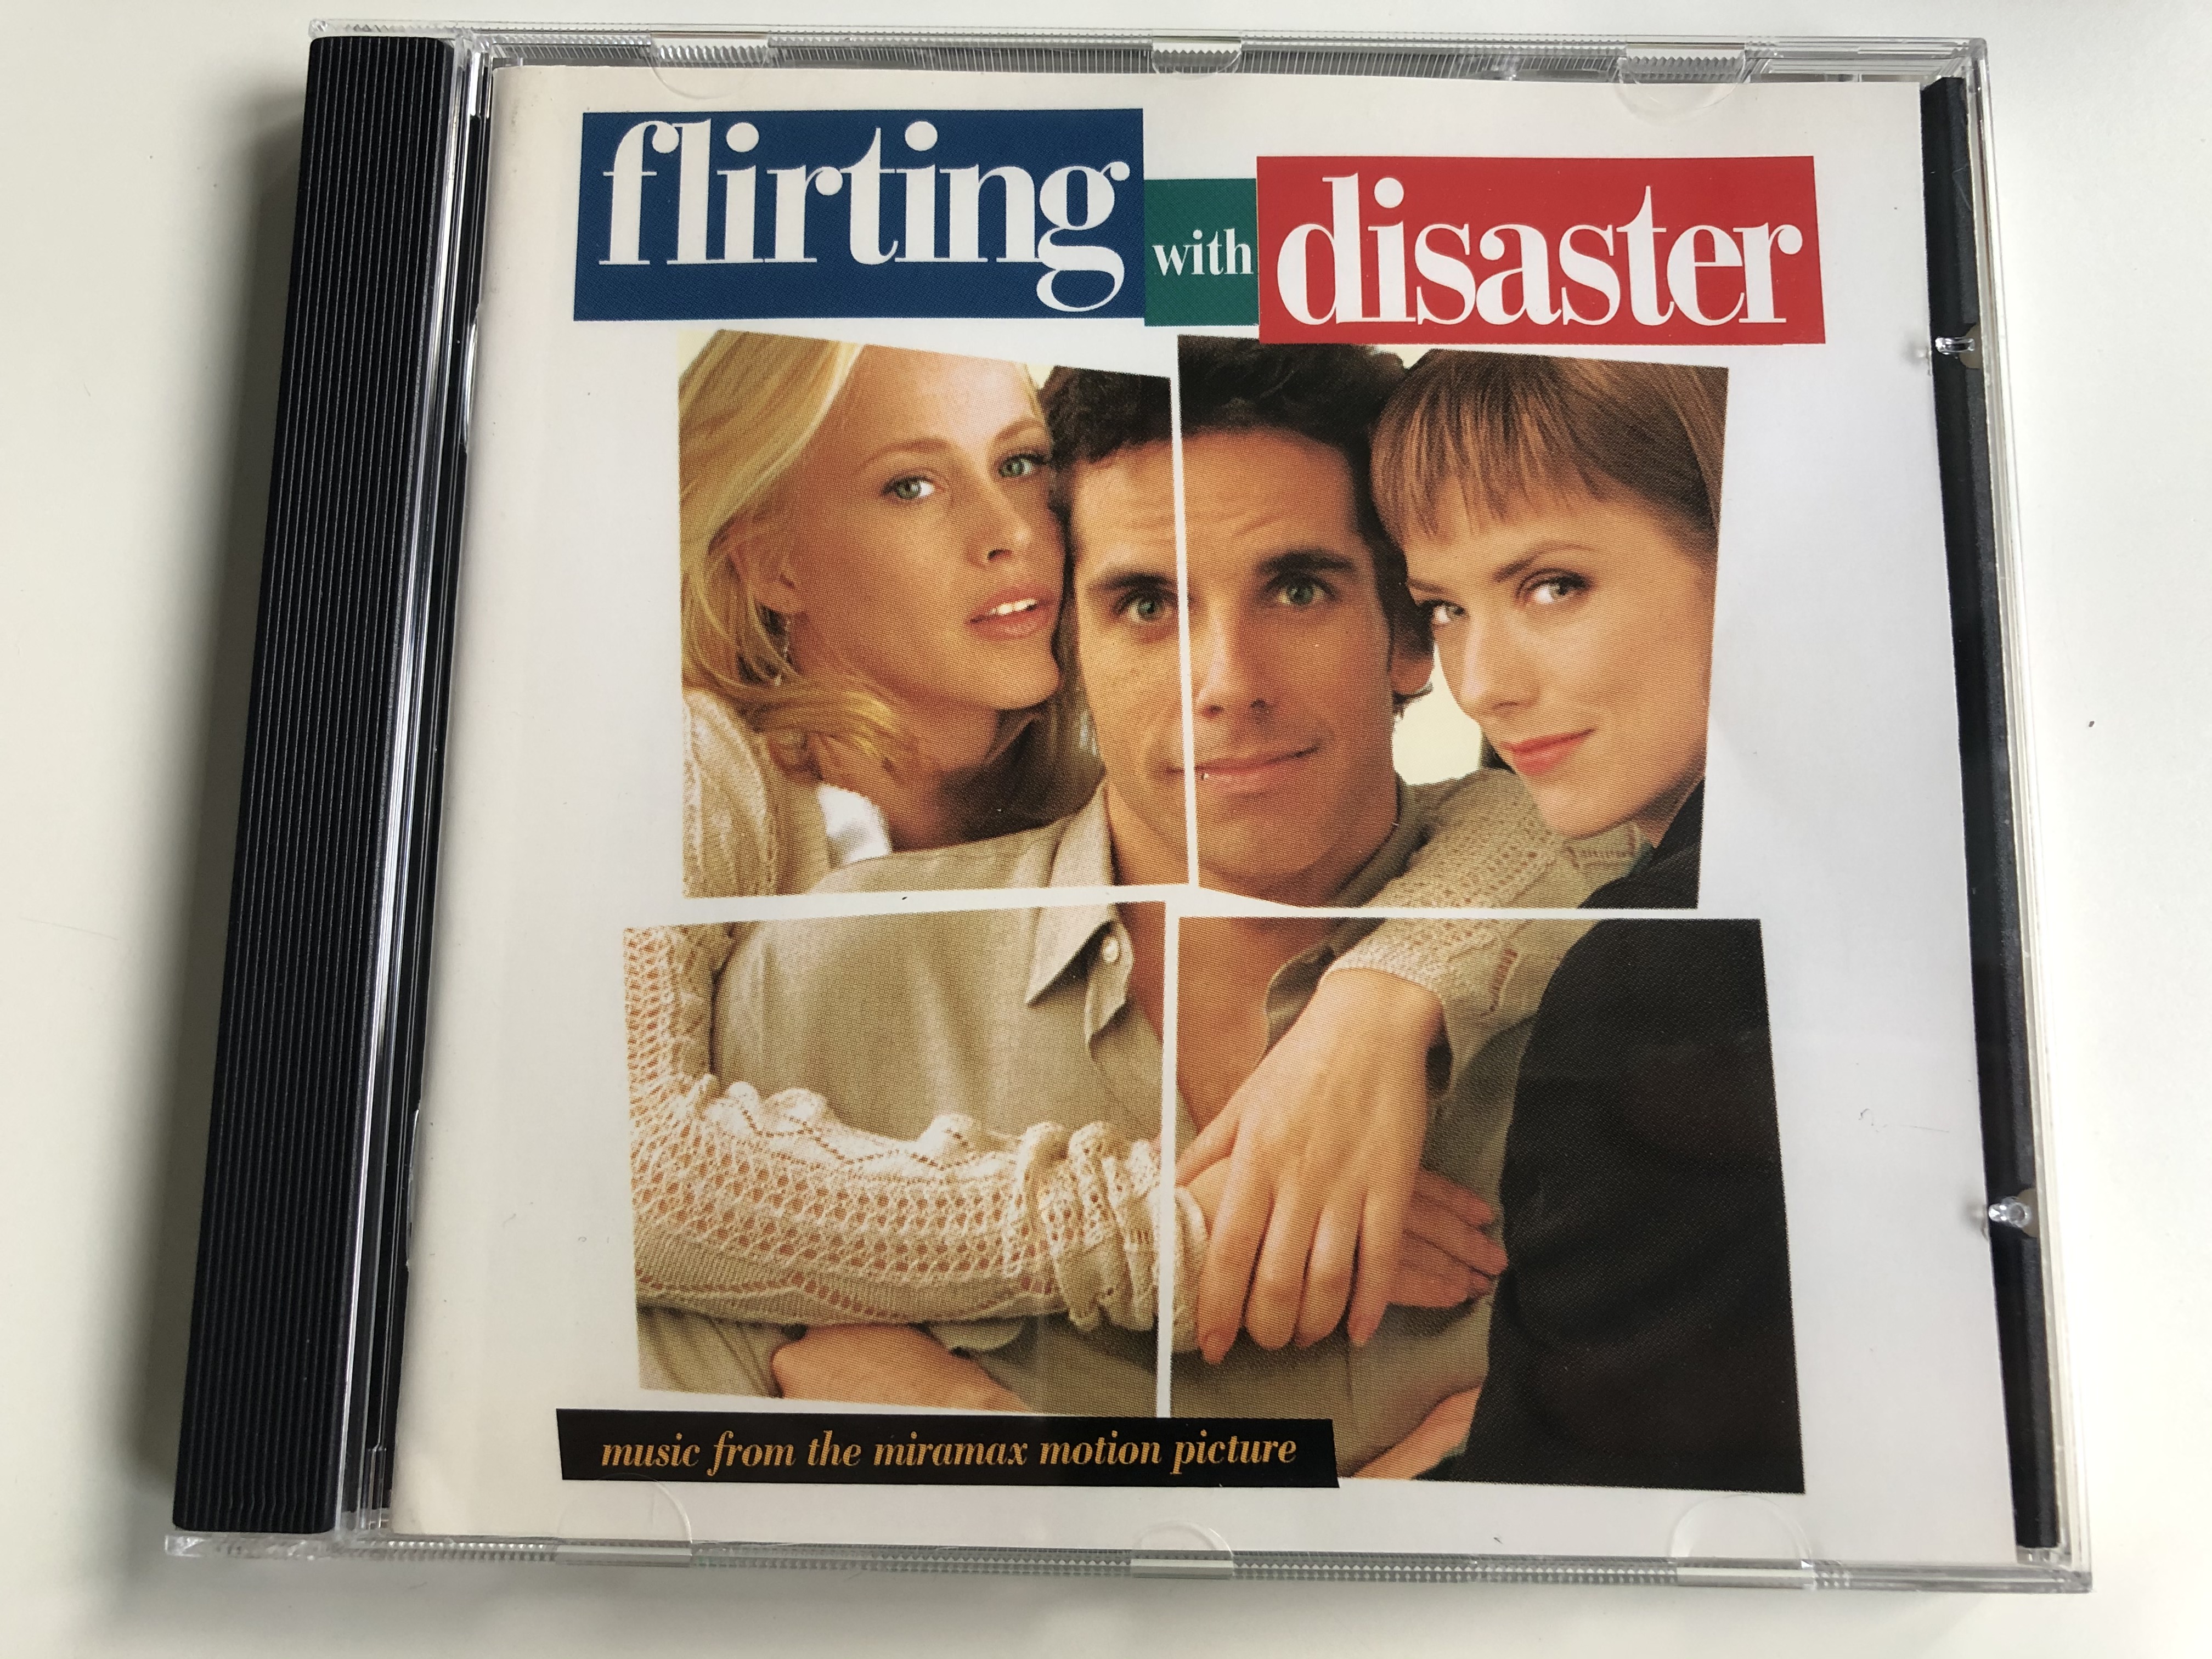 flirting-with-disaster-music-from-the-miramax-motion-picture-geffen-records-audio-cd-1996-ged-24970-1-.jpg